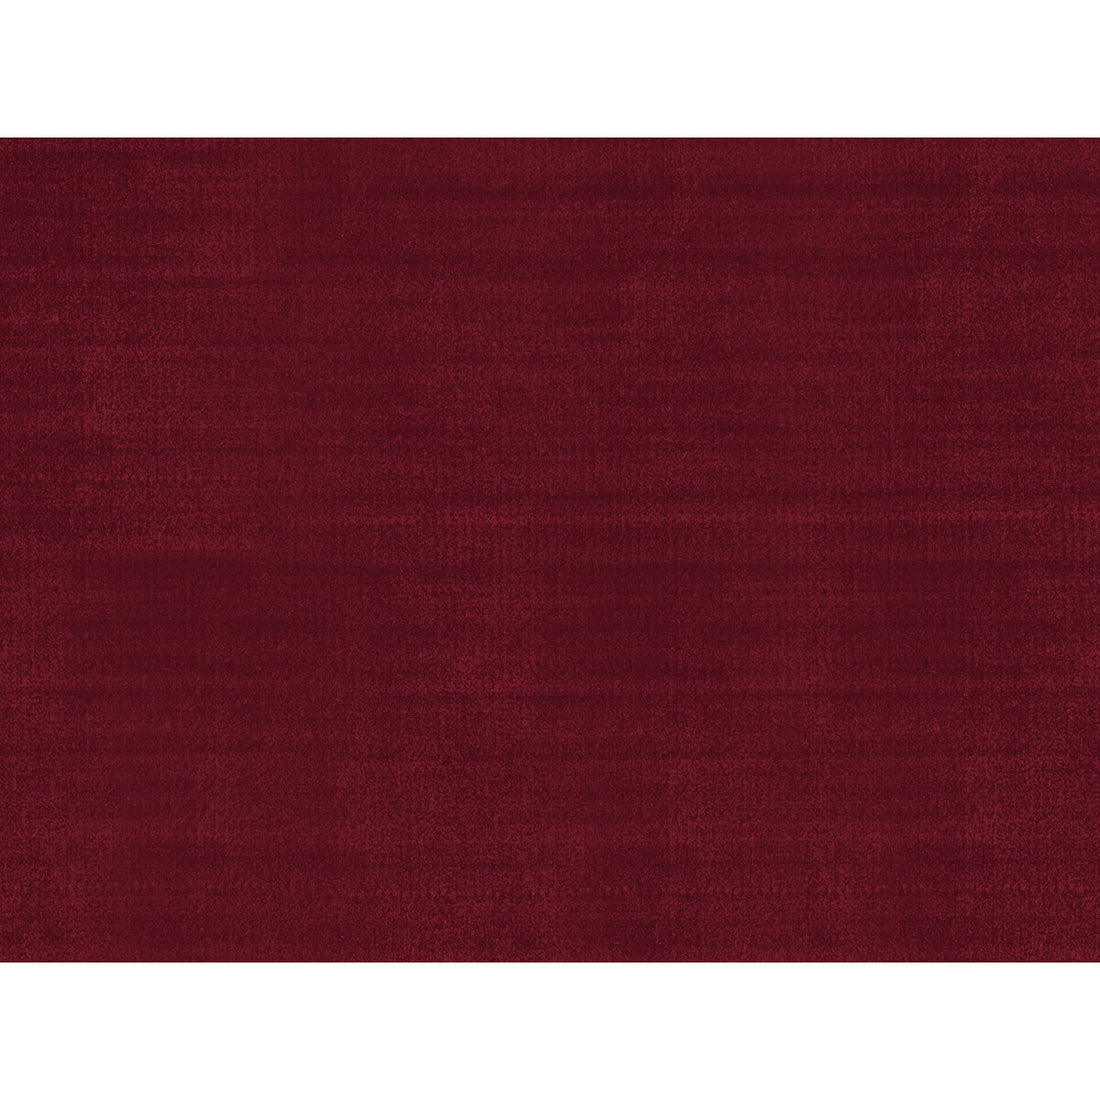 York Velvet fabric in ruby color - pattern 33438.172.0 - by Kravet Couture